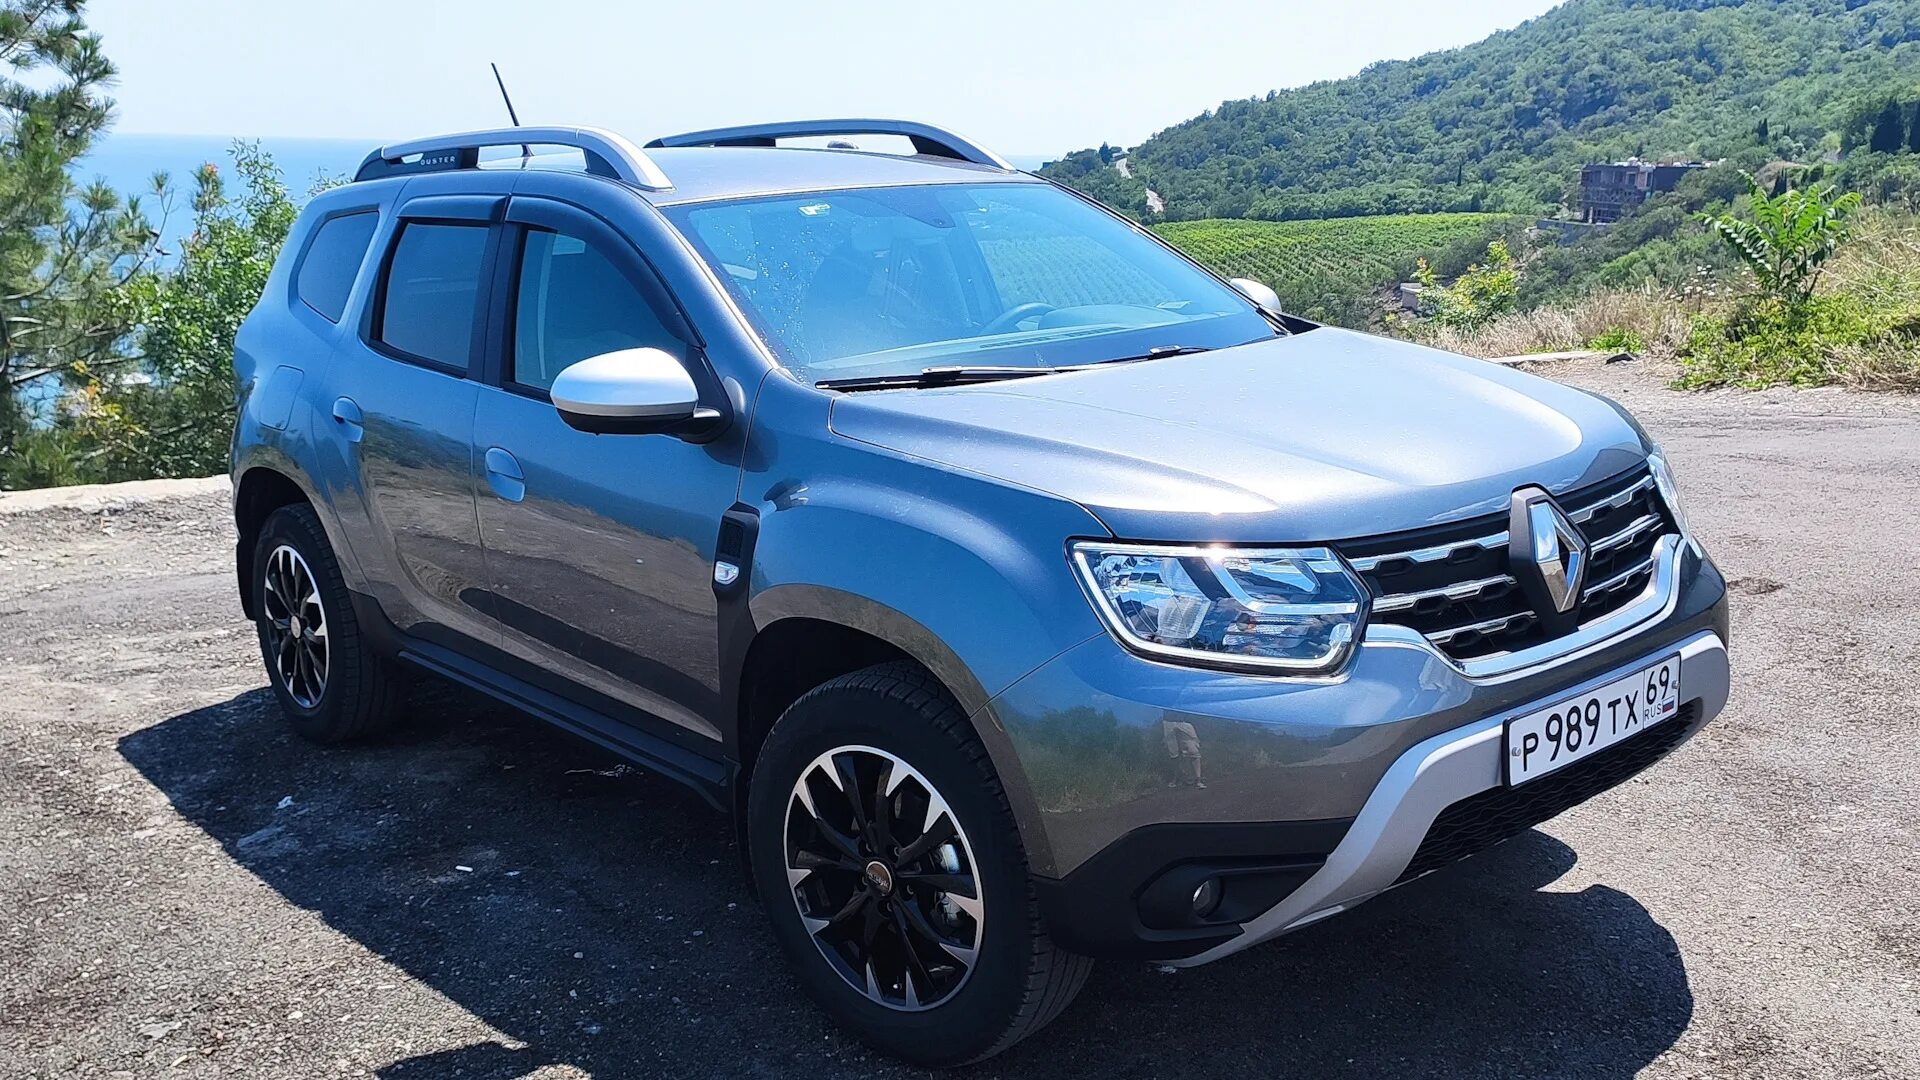 Renault Duster 2. Рено Дастер 2022. Renault Duster 2021. Новый Рено Дастер 2022. Купить дастер 2020 года